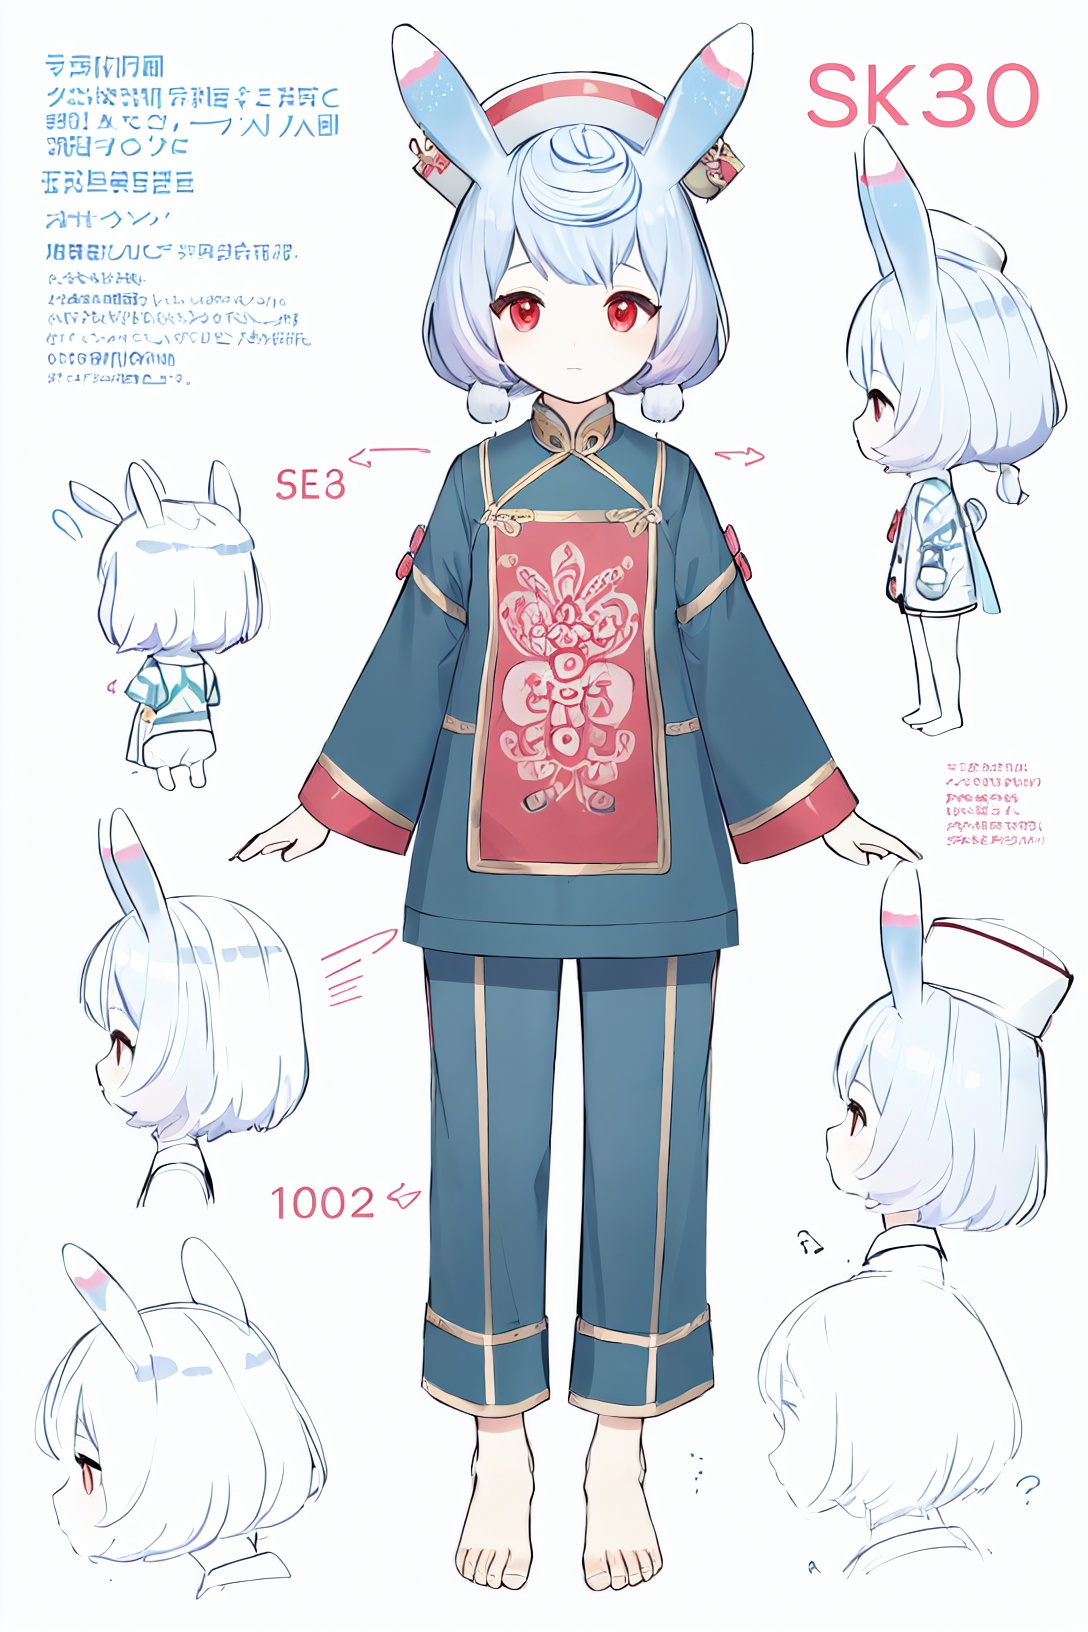 multiple views, pencil sketch, (sketch:1.25), (loli), ((no shoes)), shy, best quality, graphite \\(medium\\), ske, gradient, rainbow, note, Line draft, highres, absurdres, (ultra-detailed:1.1), (illustration:1.1), (infographic:1.2), pajamas, (all clothes configuration:1.15), (solo), perfectly drawn hands, standing, cohesive background, paper, action, (character design:1.1), china dress, monarch \(black gerard\) \(azur lane\), <lora:Sigewinne-v100-000019:0.8>, Sigewinne, 1girl, red eyes, animal ears, chibi, rabbit ears, hat, <lora:Anime Lineart ,Manga-like (线稿,線画,マンガ風,漫画风) Style:0.4>, <lora:Sketchy - Style:0.2>, [[delicate fingers and hands:0.55]::0.85], (detail fingers), (empty hands:1.1), bare_hands, (beautiful_face), ((intricate_detail)), (revealing clothes:1.2), clear face, ((finely_detailed)), fine_fabric_emphasis, ((glossy)), 